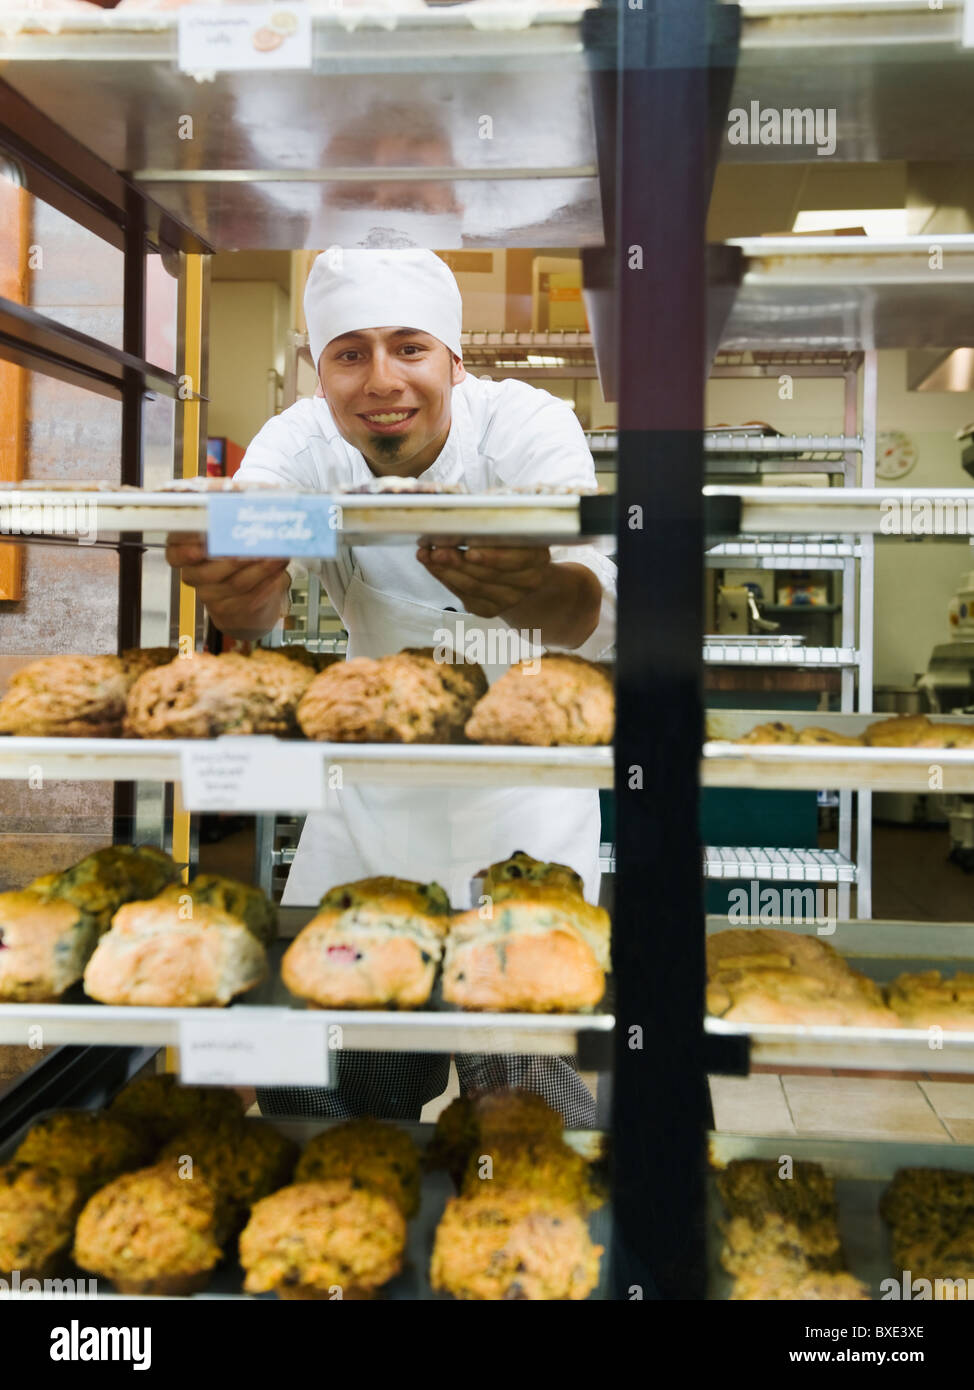 Baker standing behind trays of baked goods Stock Photo